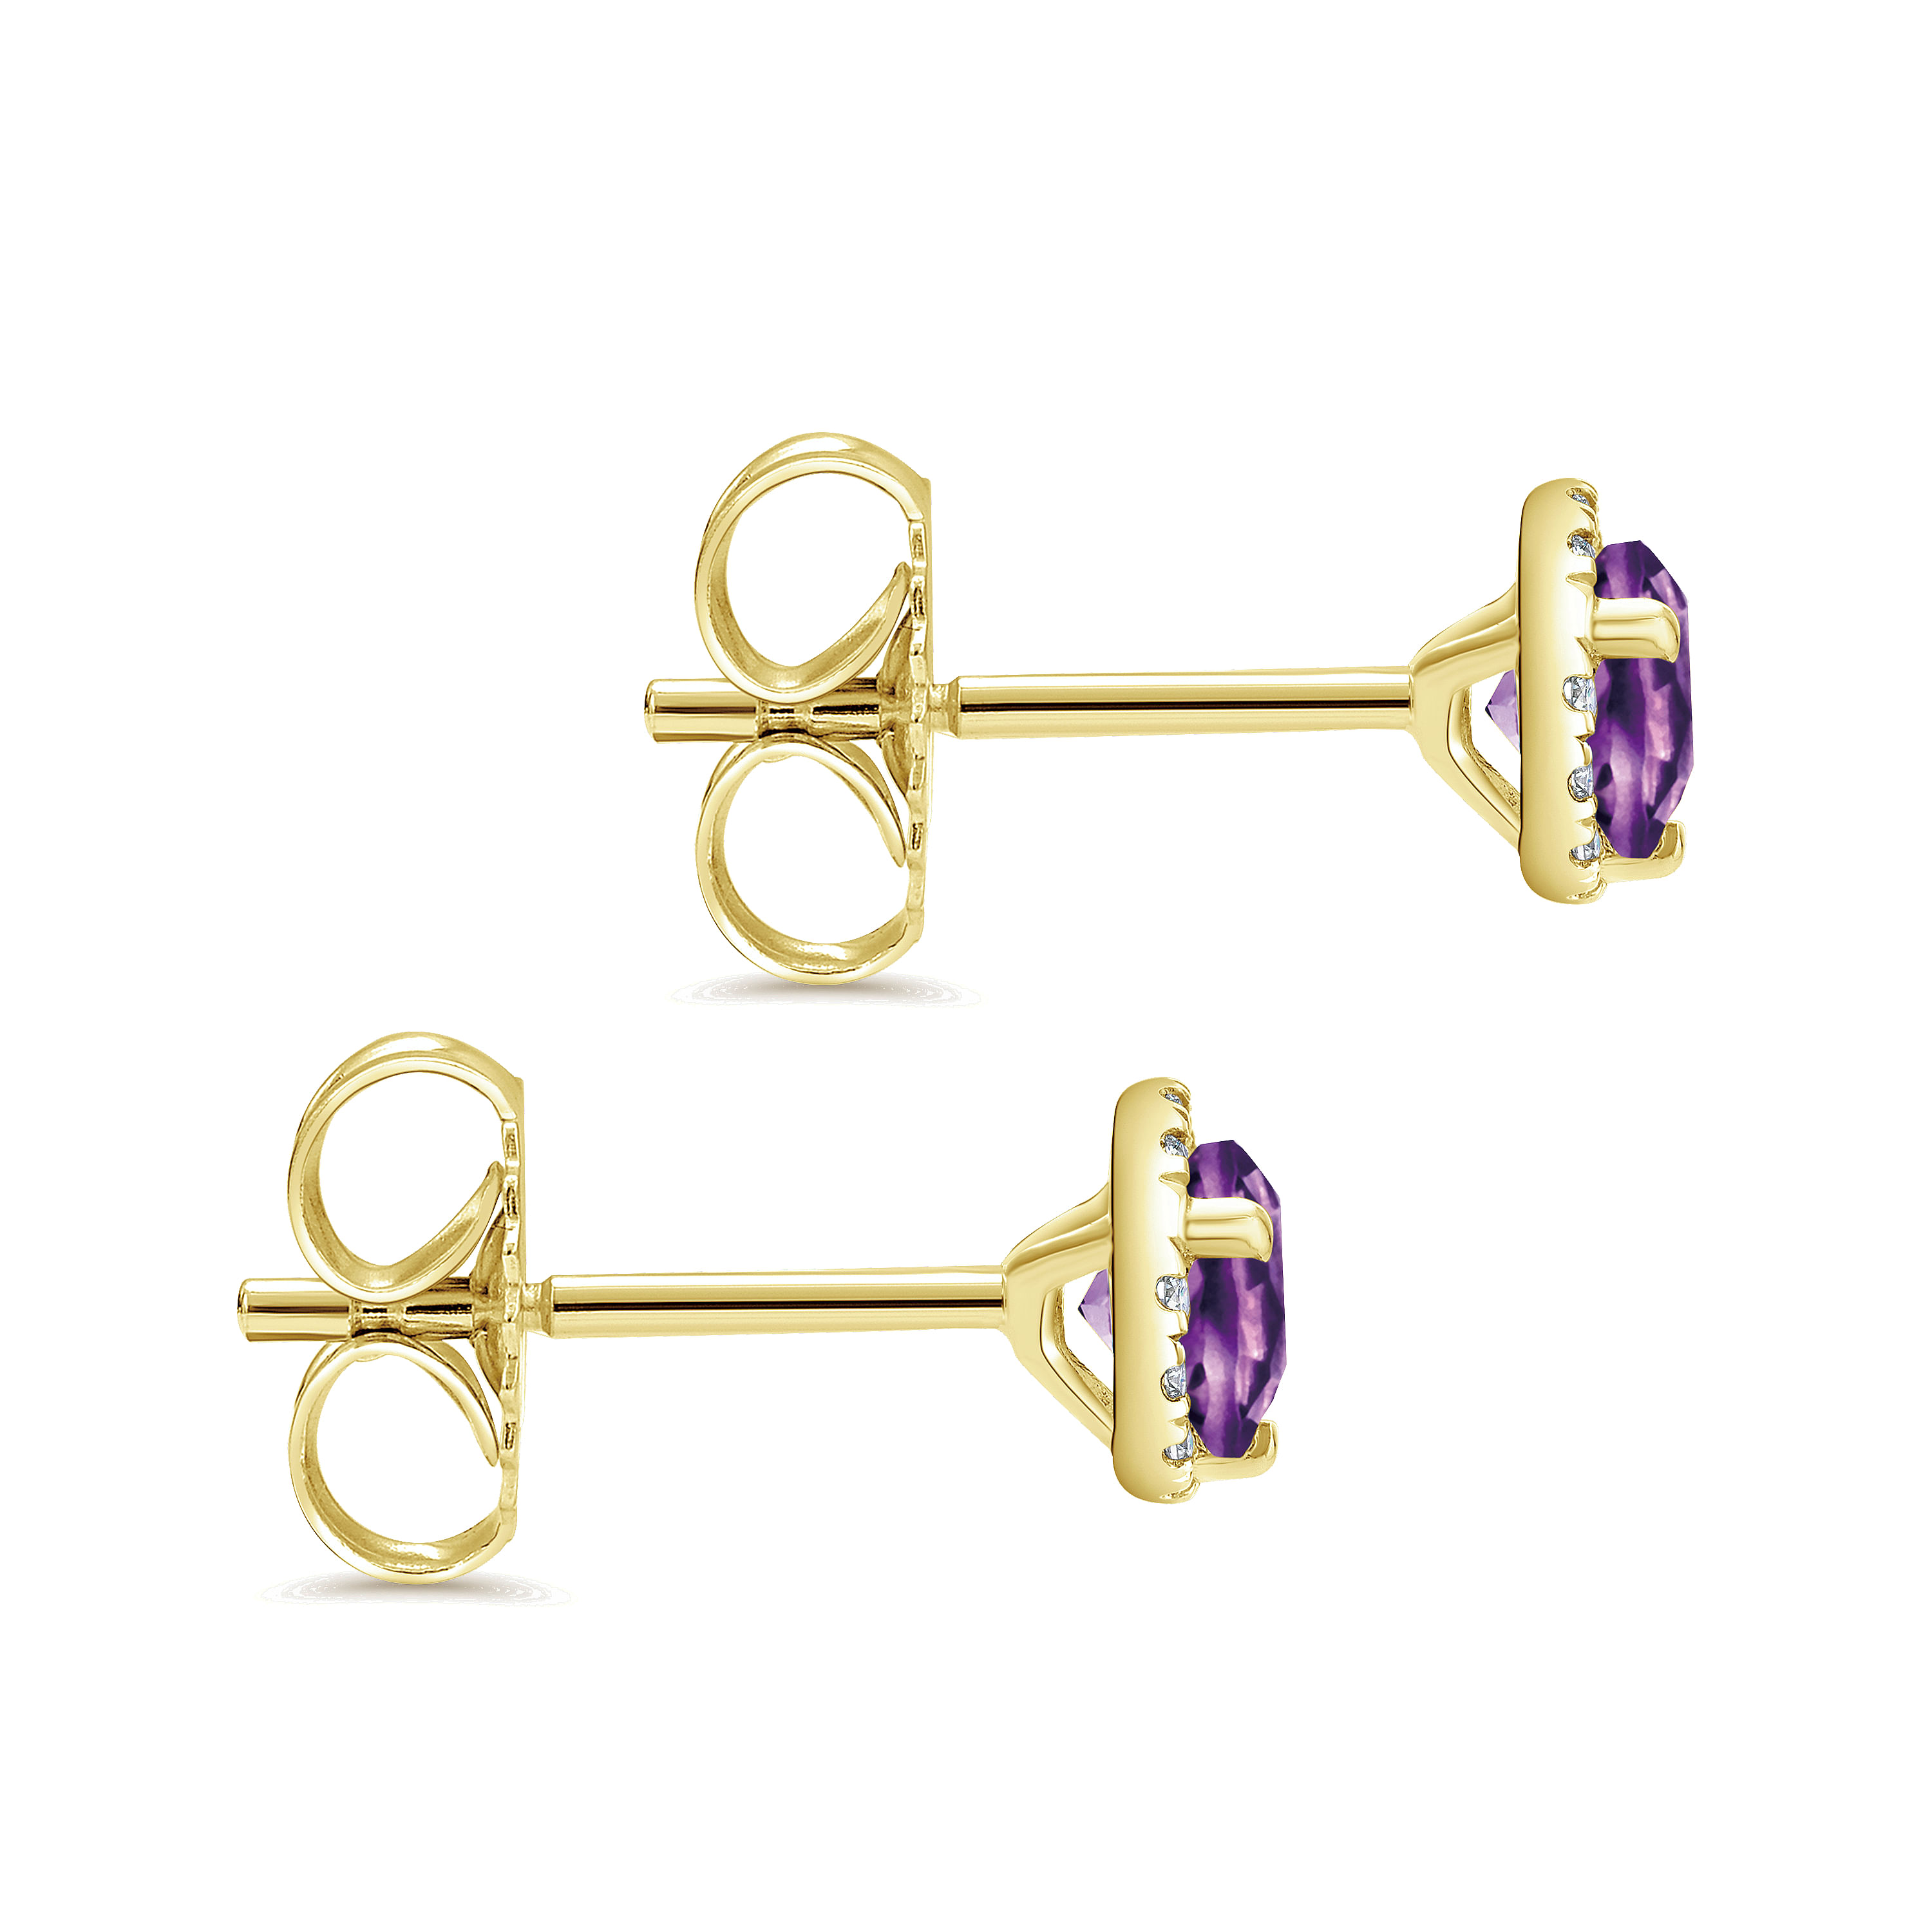 14K Yellow Gold Round Halo Amethyst and Diamond Stud Earrings